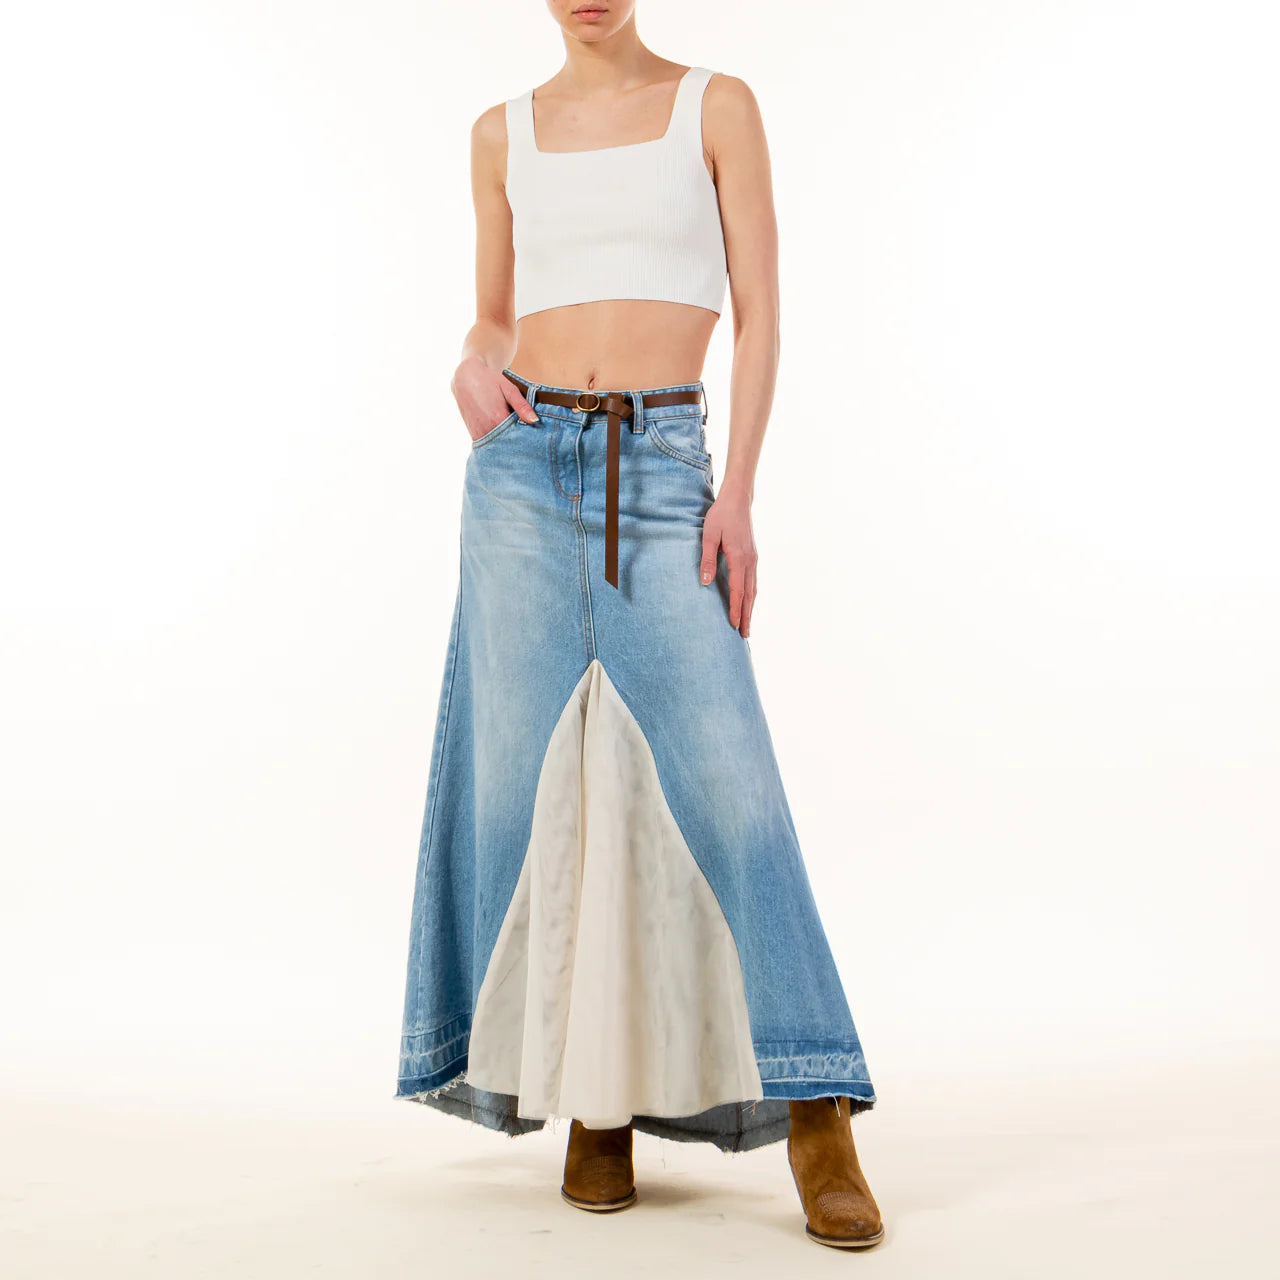 Tensione in Jeans skirt